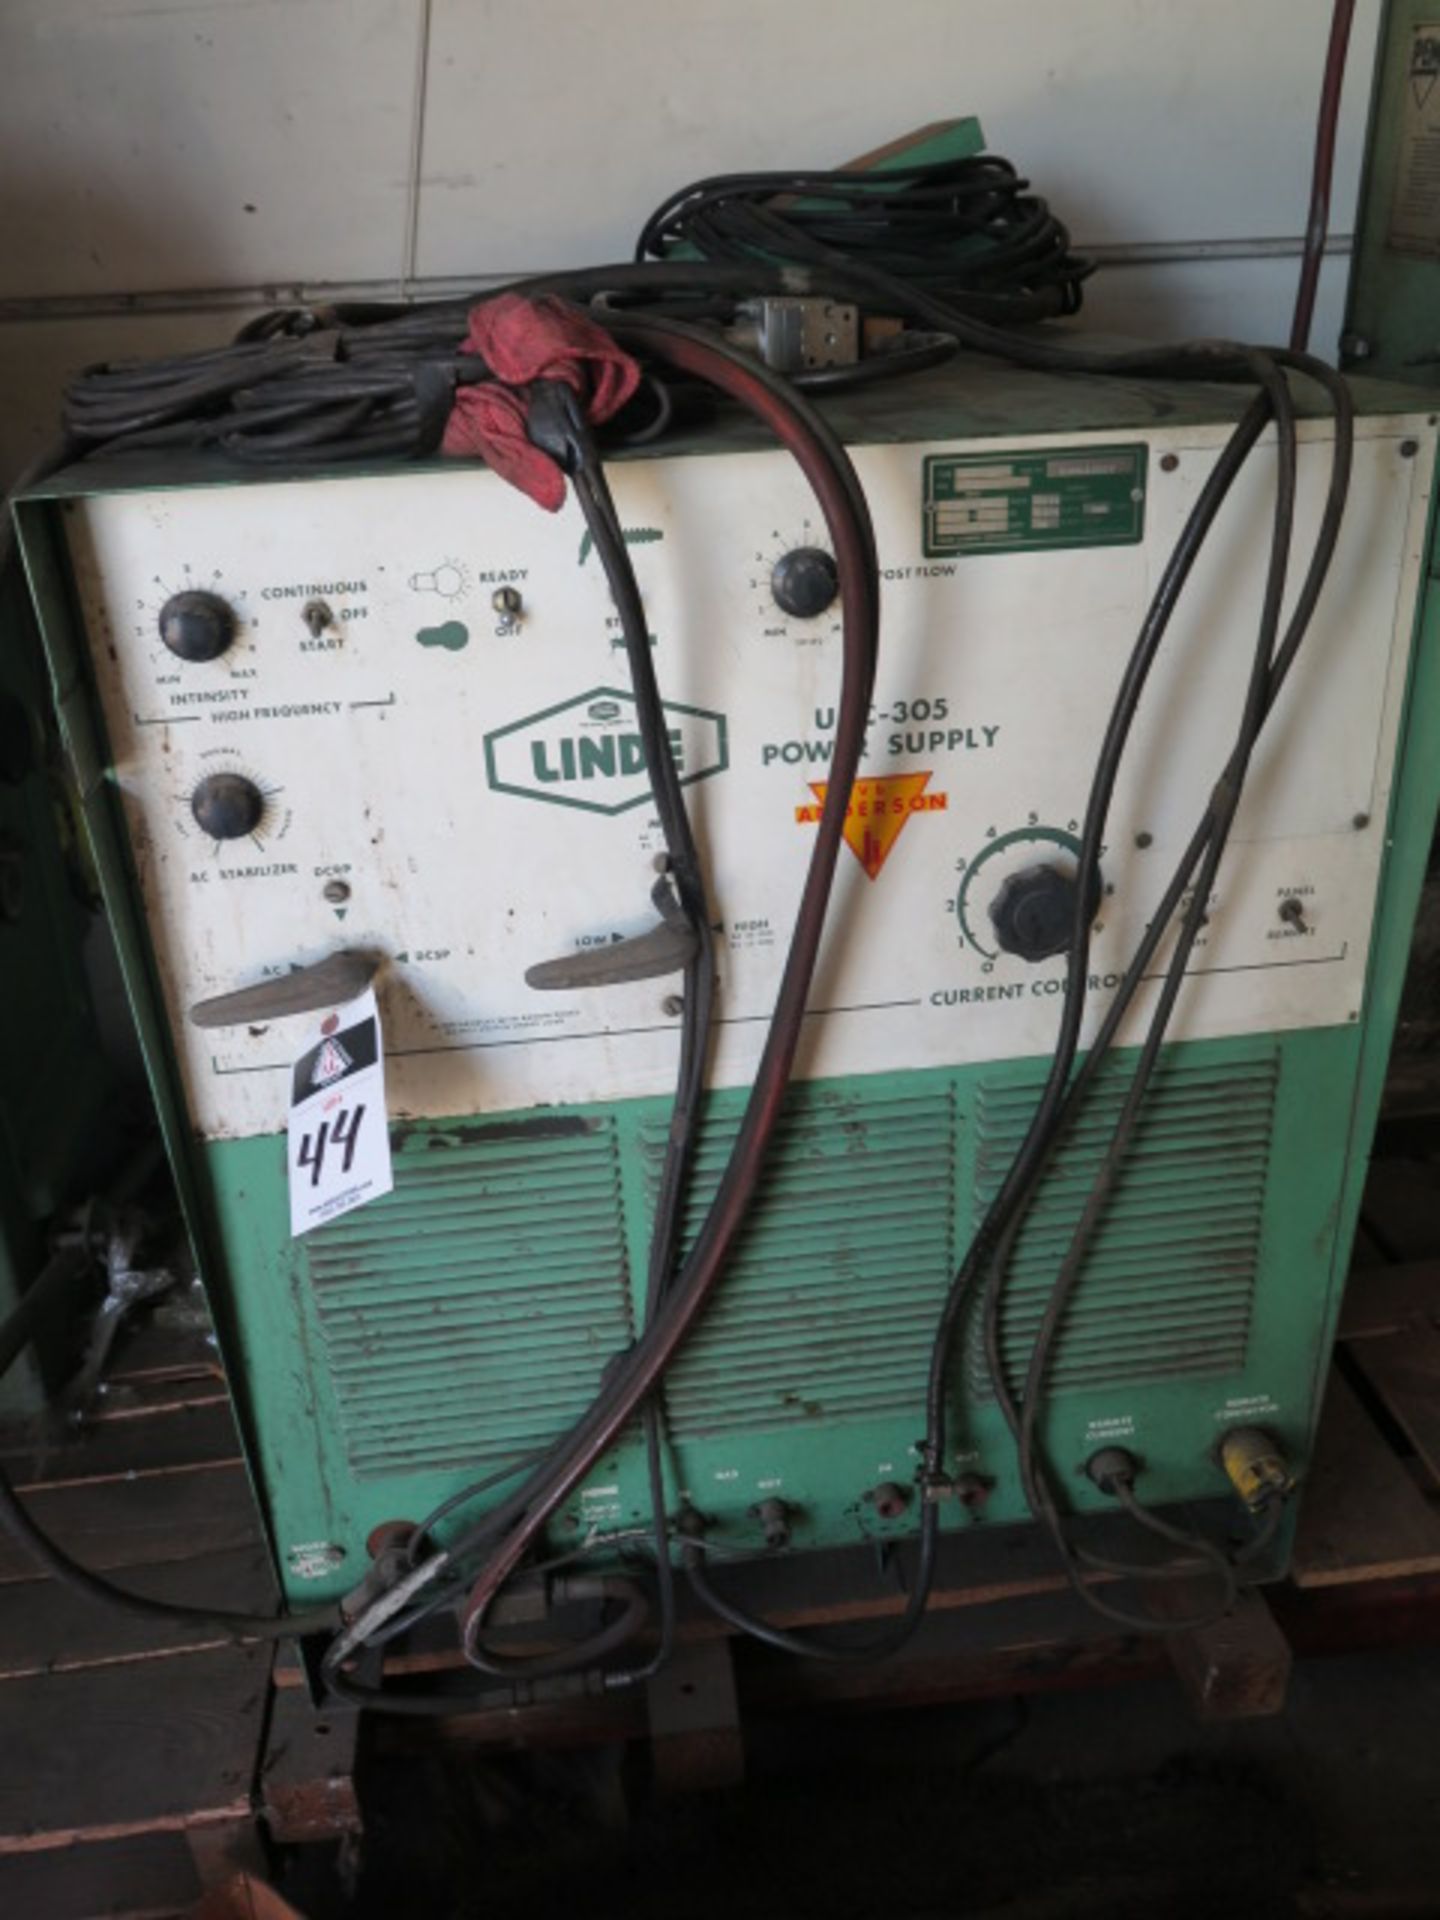 Linde UCC-305 Arc Welding Power Source s/n C78G12227 - Image 2 of 4